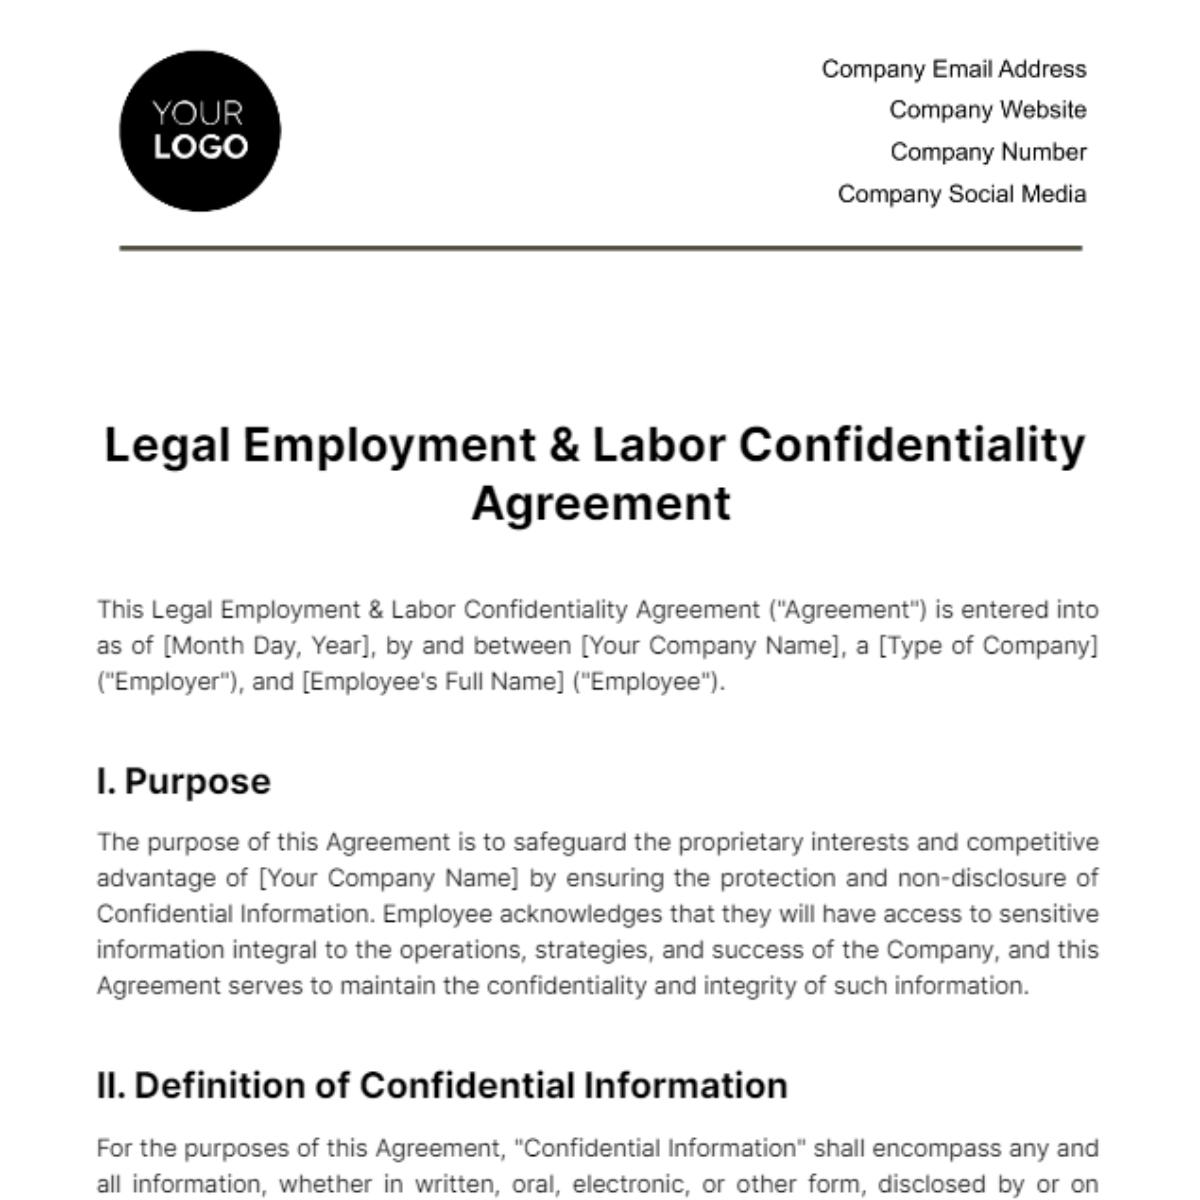 Free Legal Employment & Labor Confidentiality Agreement Template